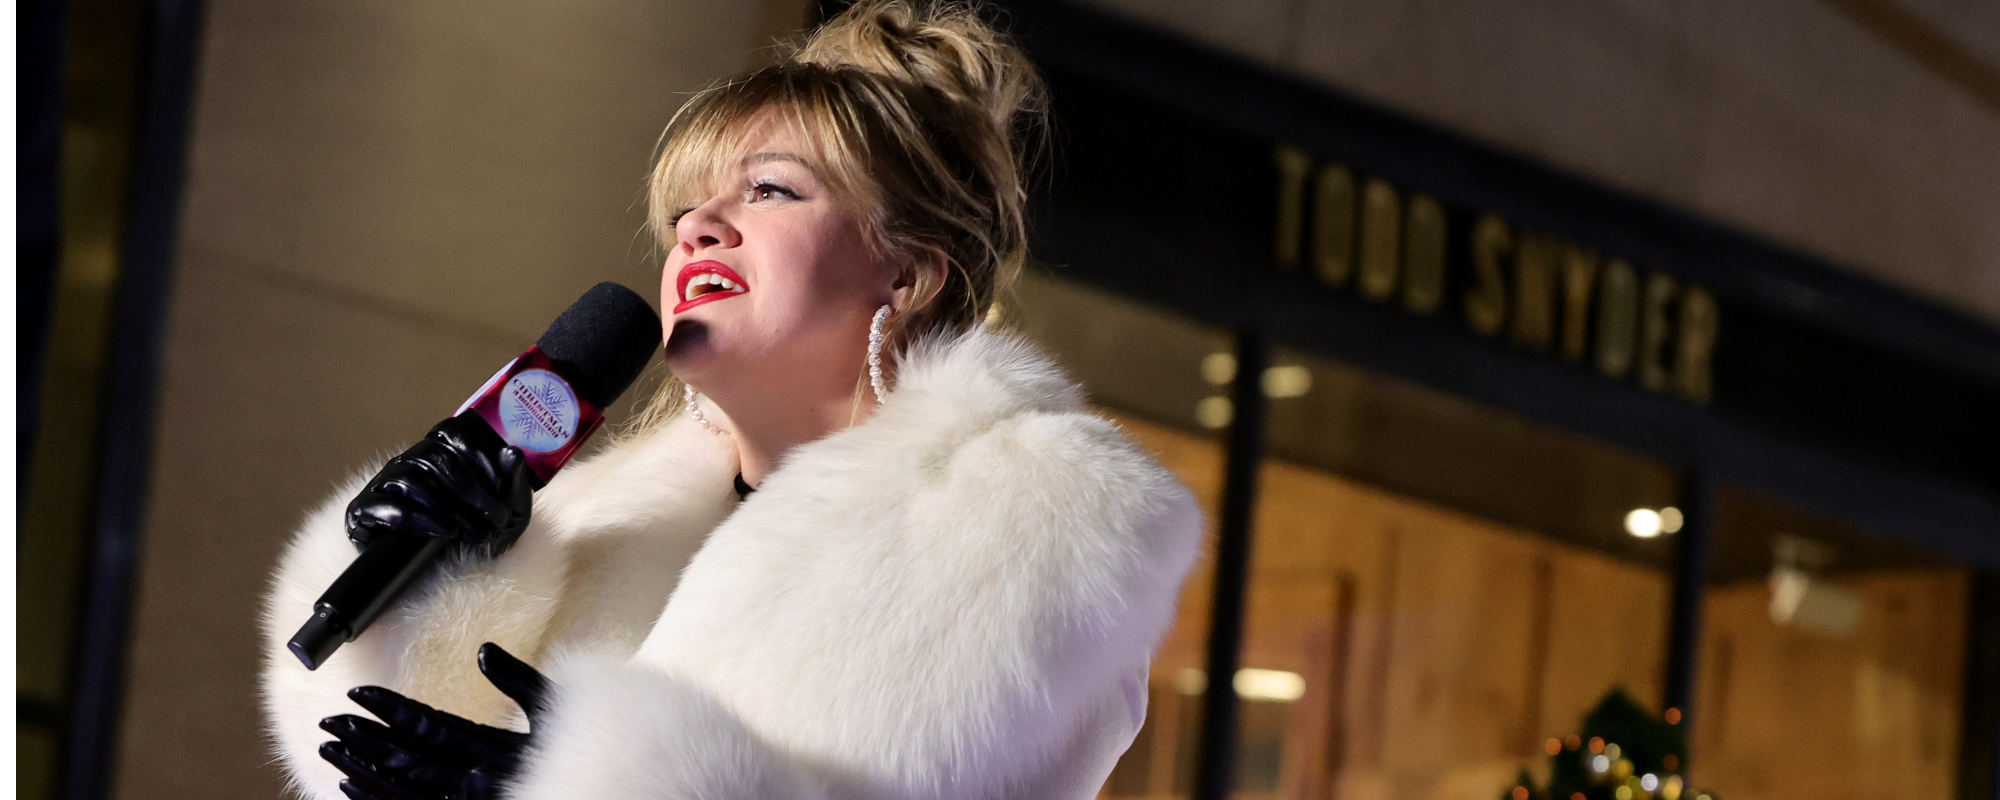 Kelly Clarkson Can’t Stop Grooving to Cher in “Adorable” Rockefeller Tree Lighting Video